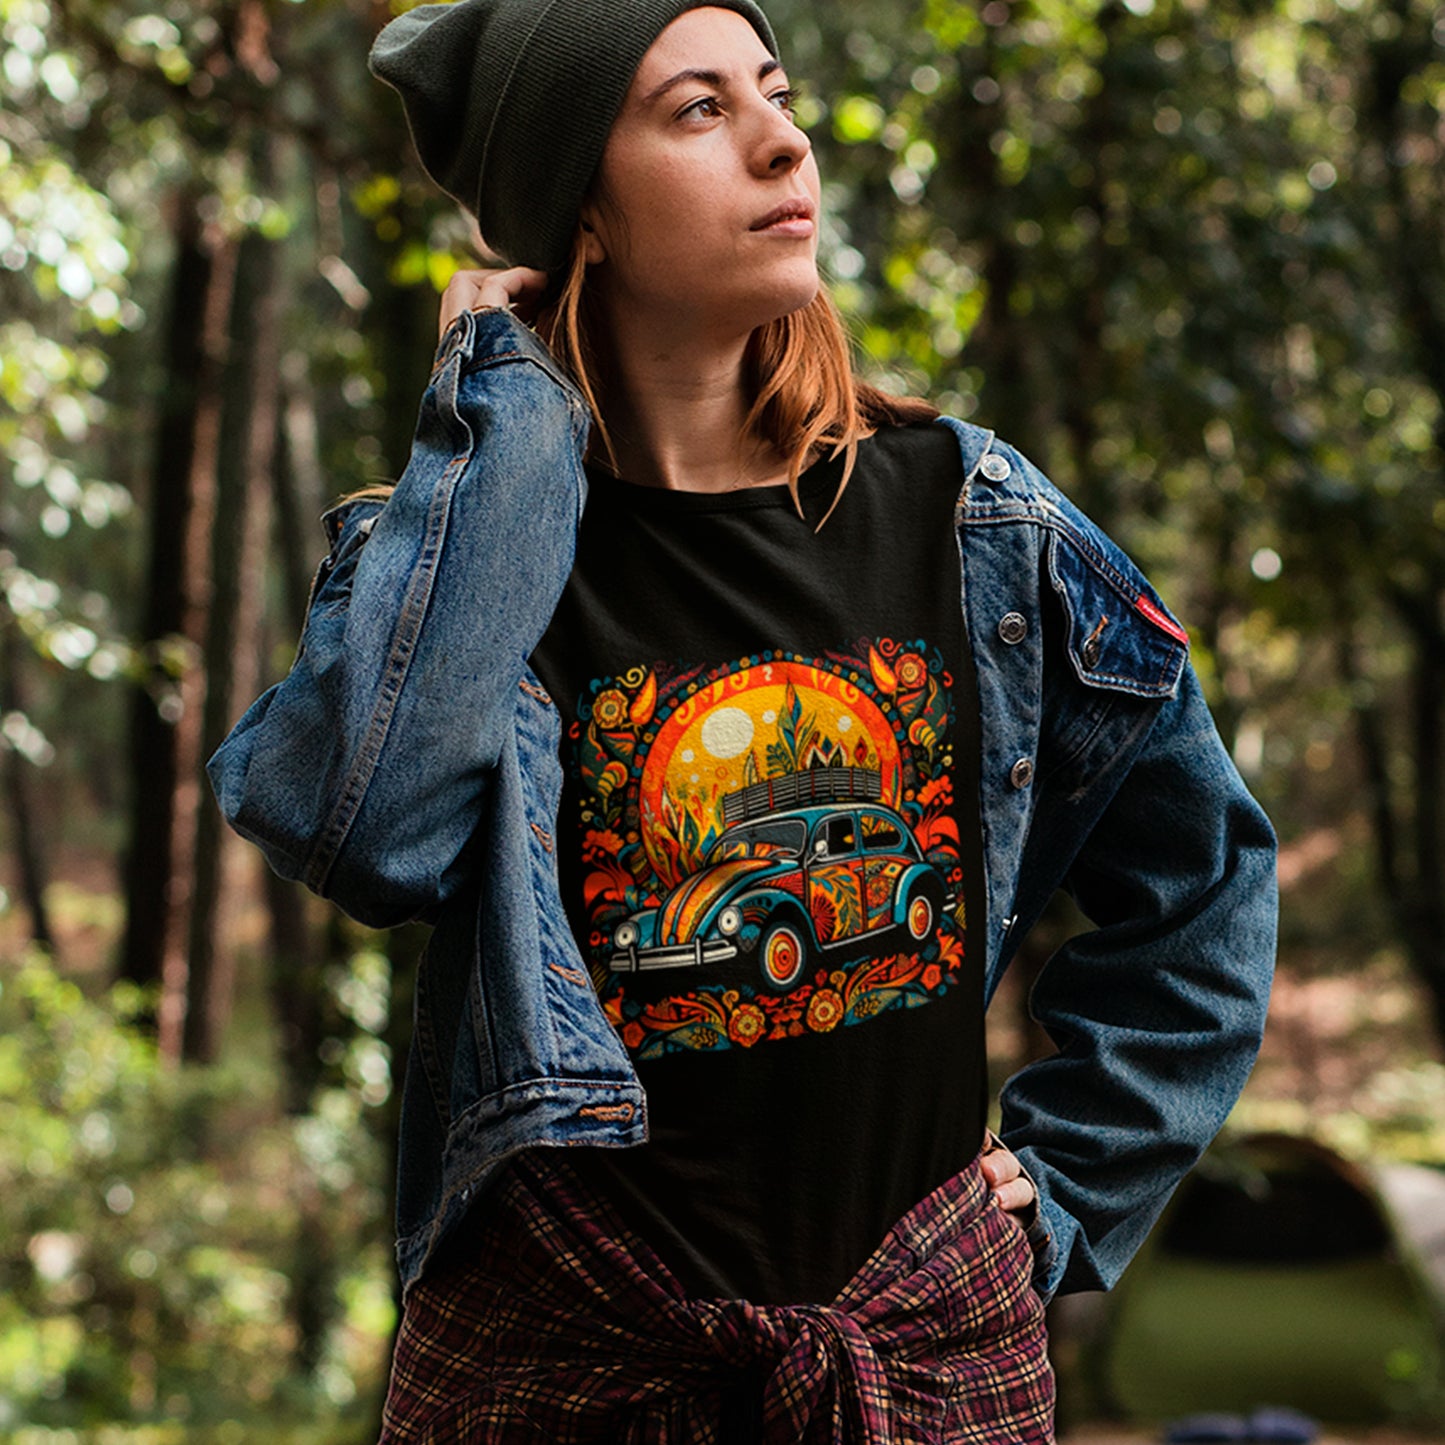 Ethereal Voyage Unisex organic cotton t-shirt worn by female model outdoors